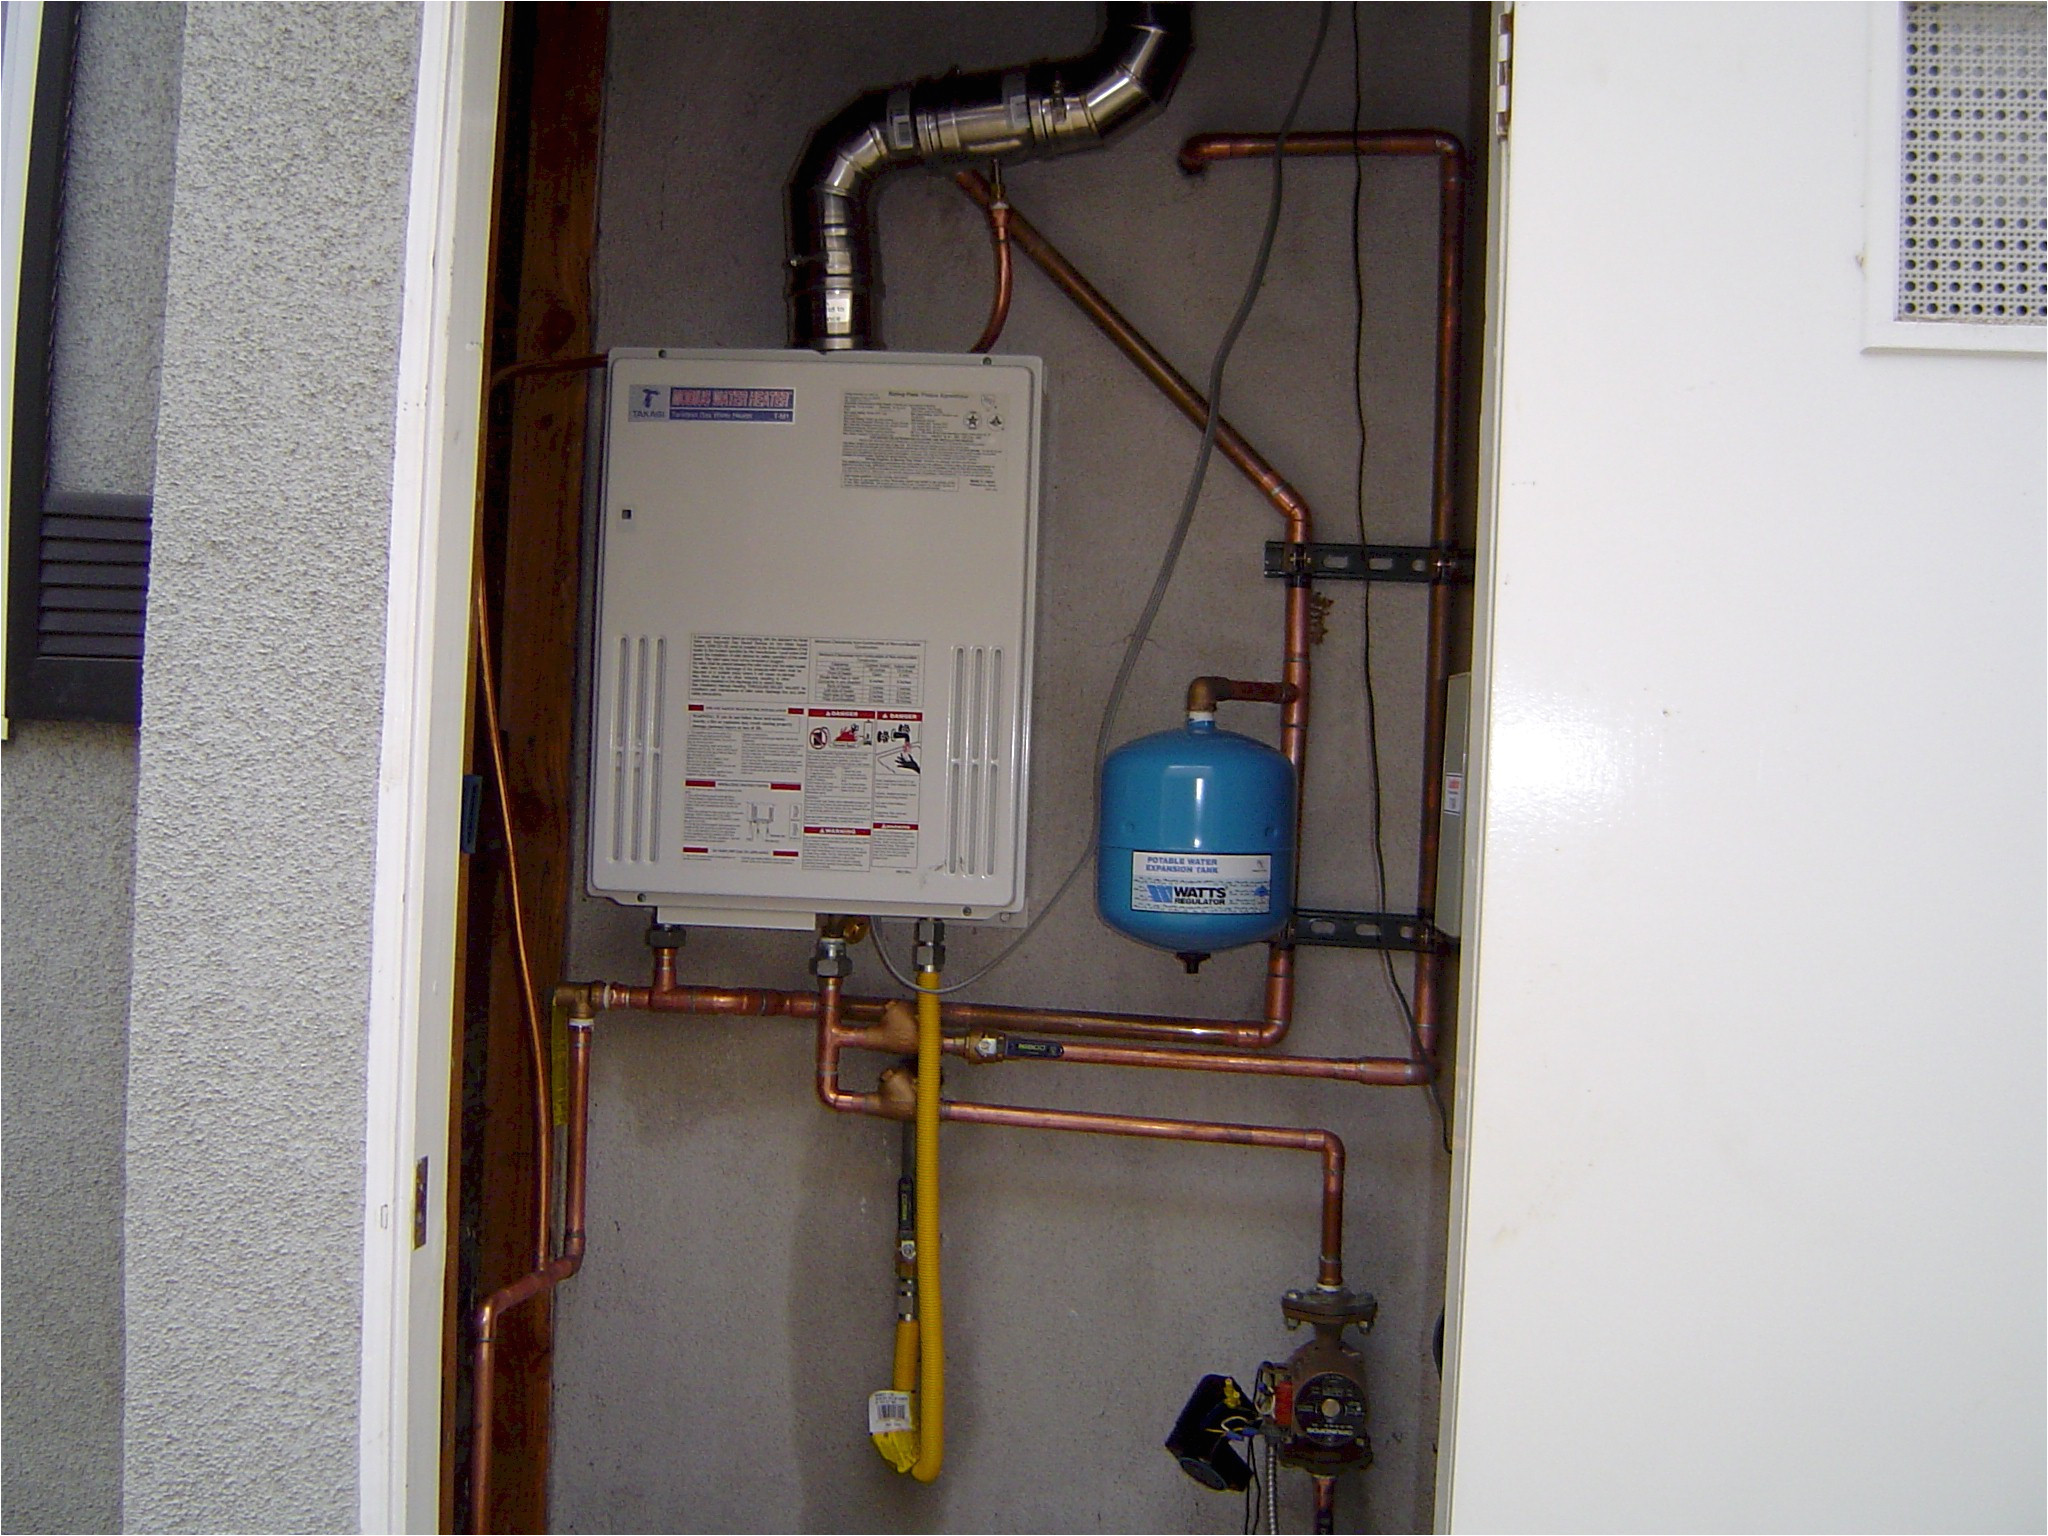 the same location with a takagi mobius tankless instant and endless hot water heater system